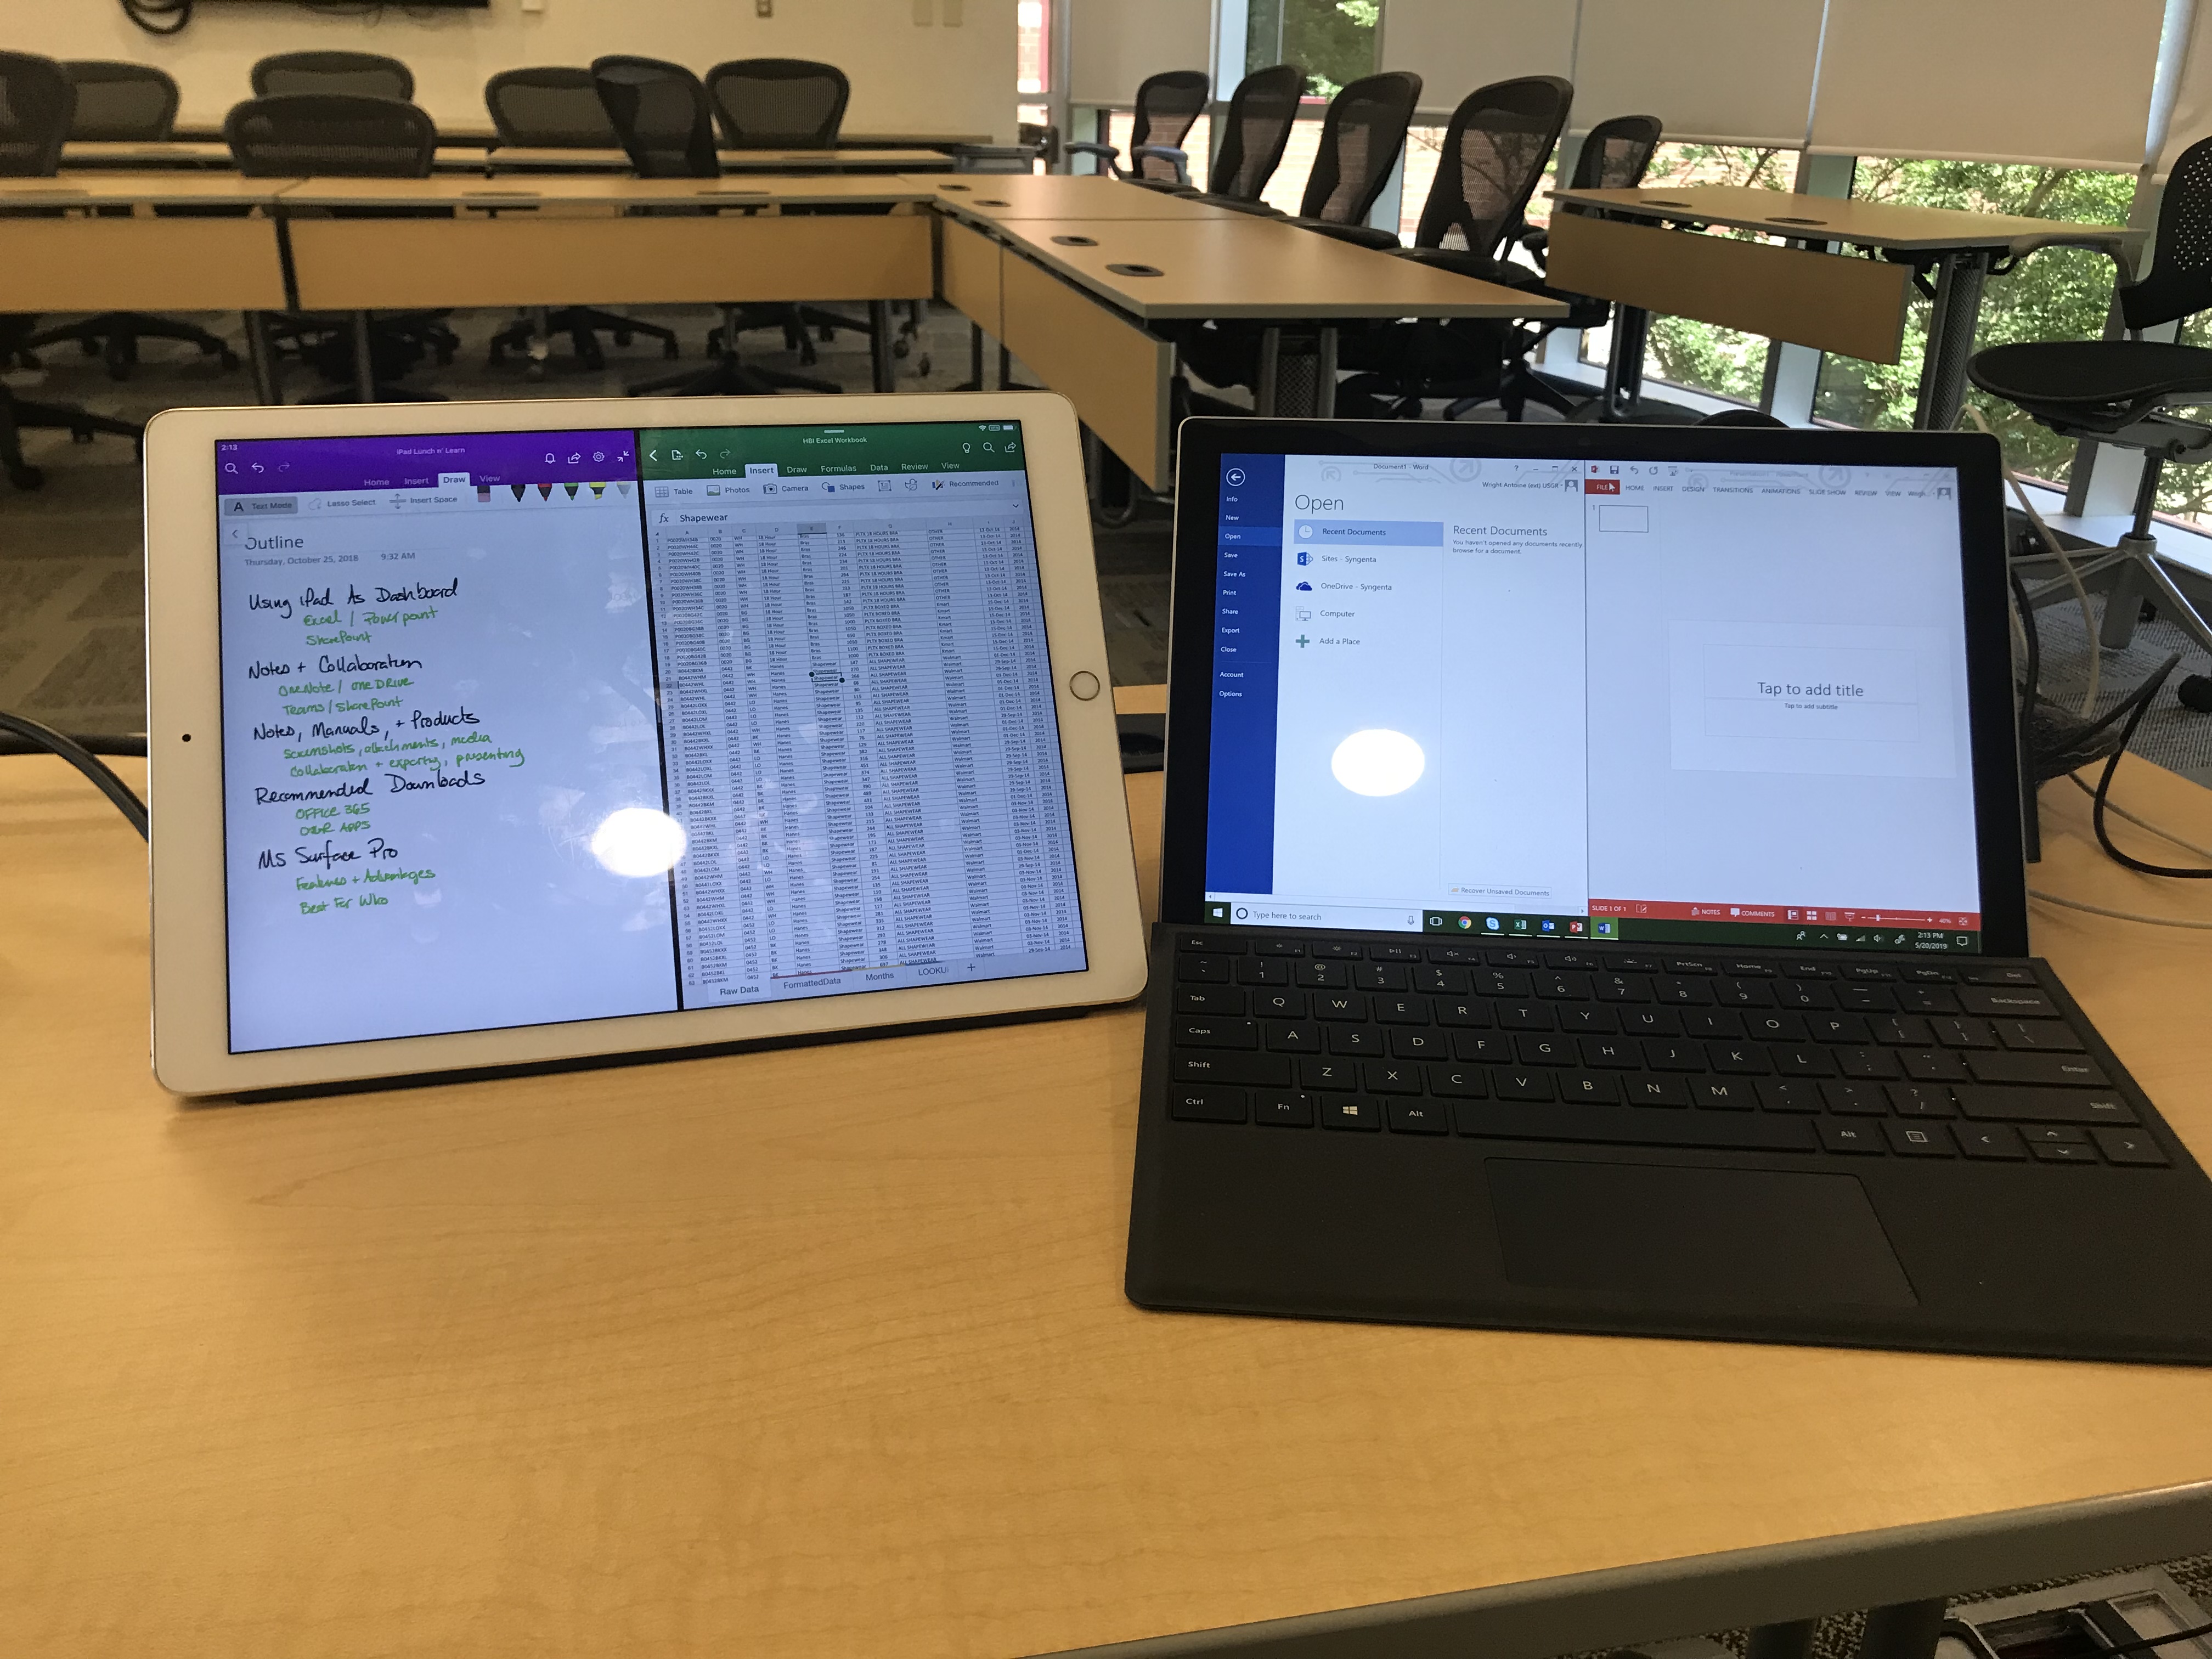 iPad Pro next to Surface Pro 4 -both showing worksapces for workshop lesson